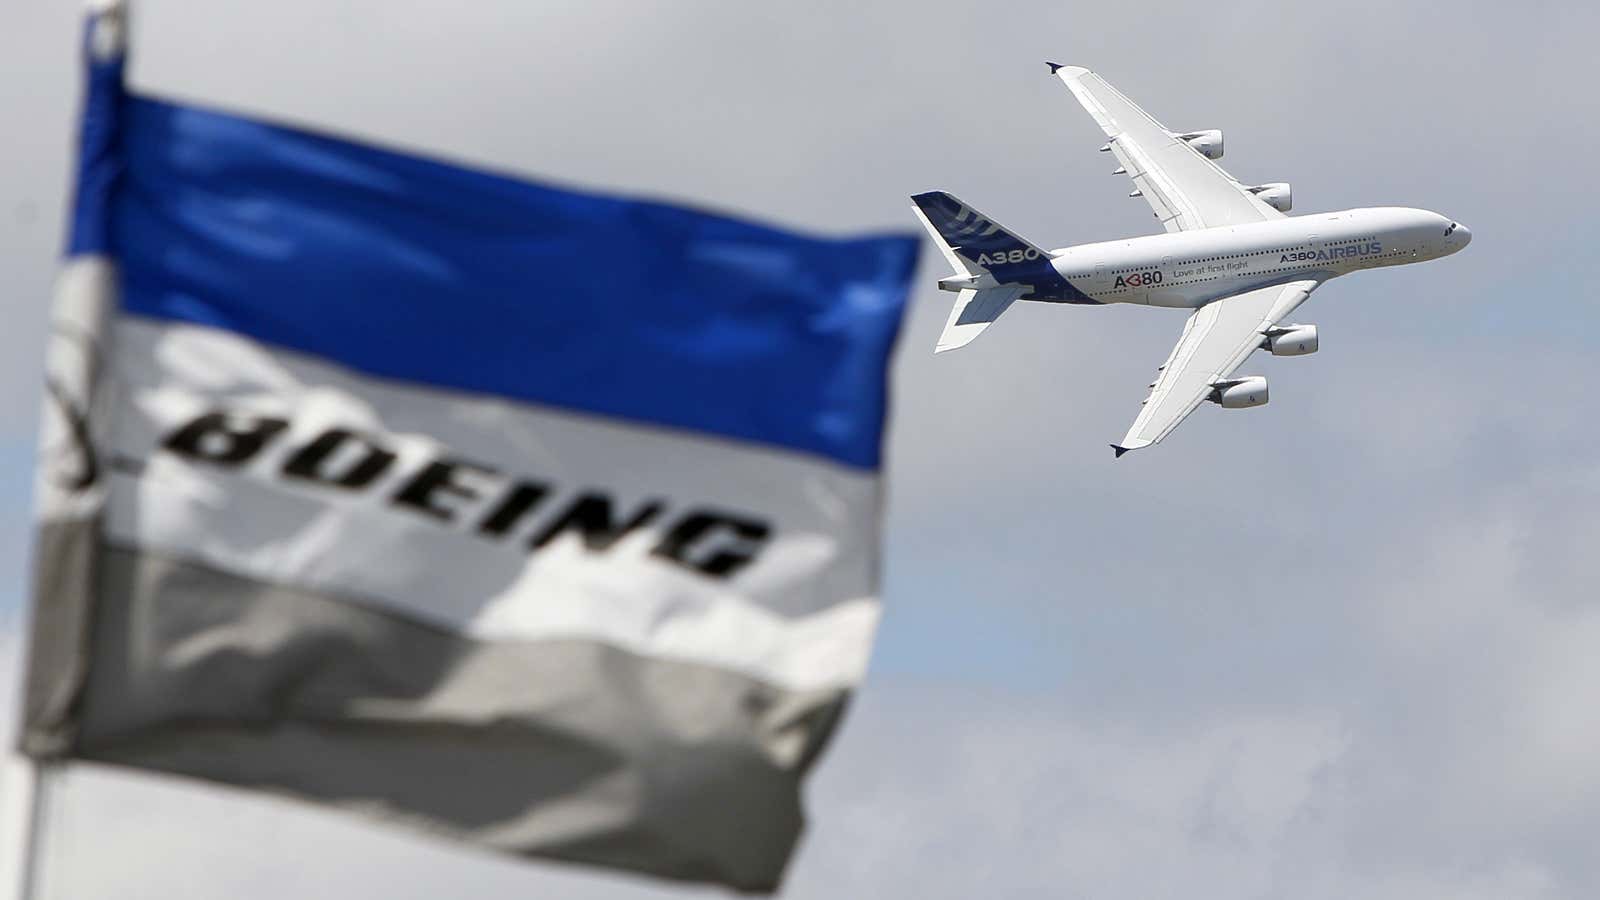 Will the Dreamliner 787’s problems allow Airbus to swoop back into the title of largest aircraft supplier? An Airbus A380 flies by a Boeing sign.